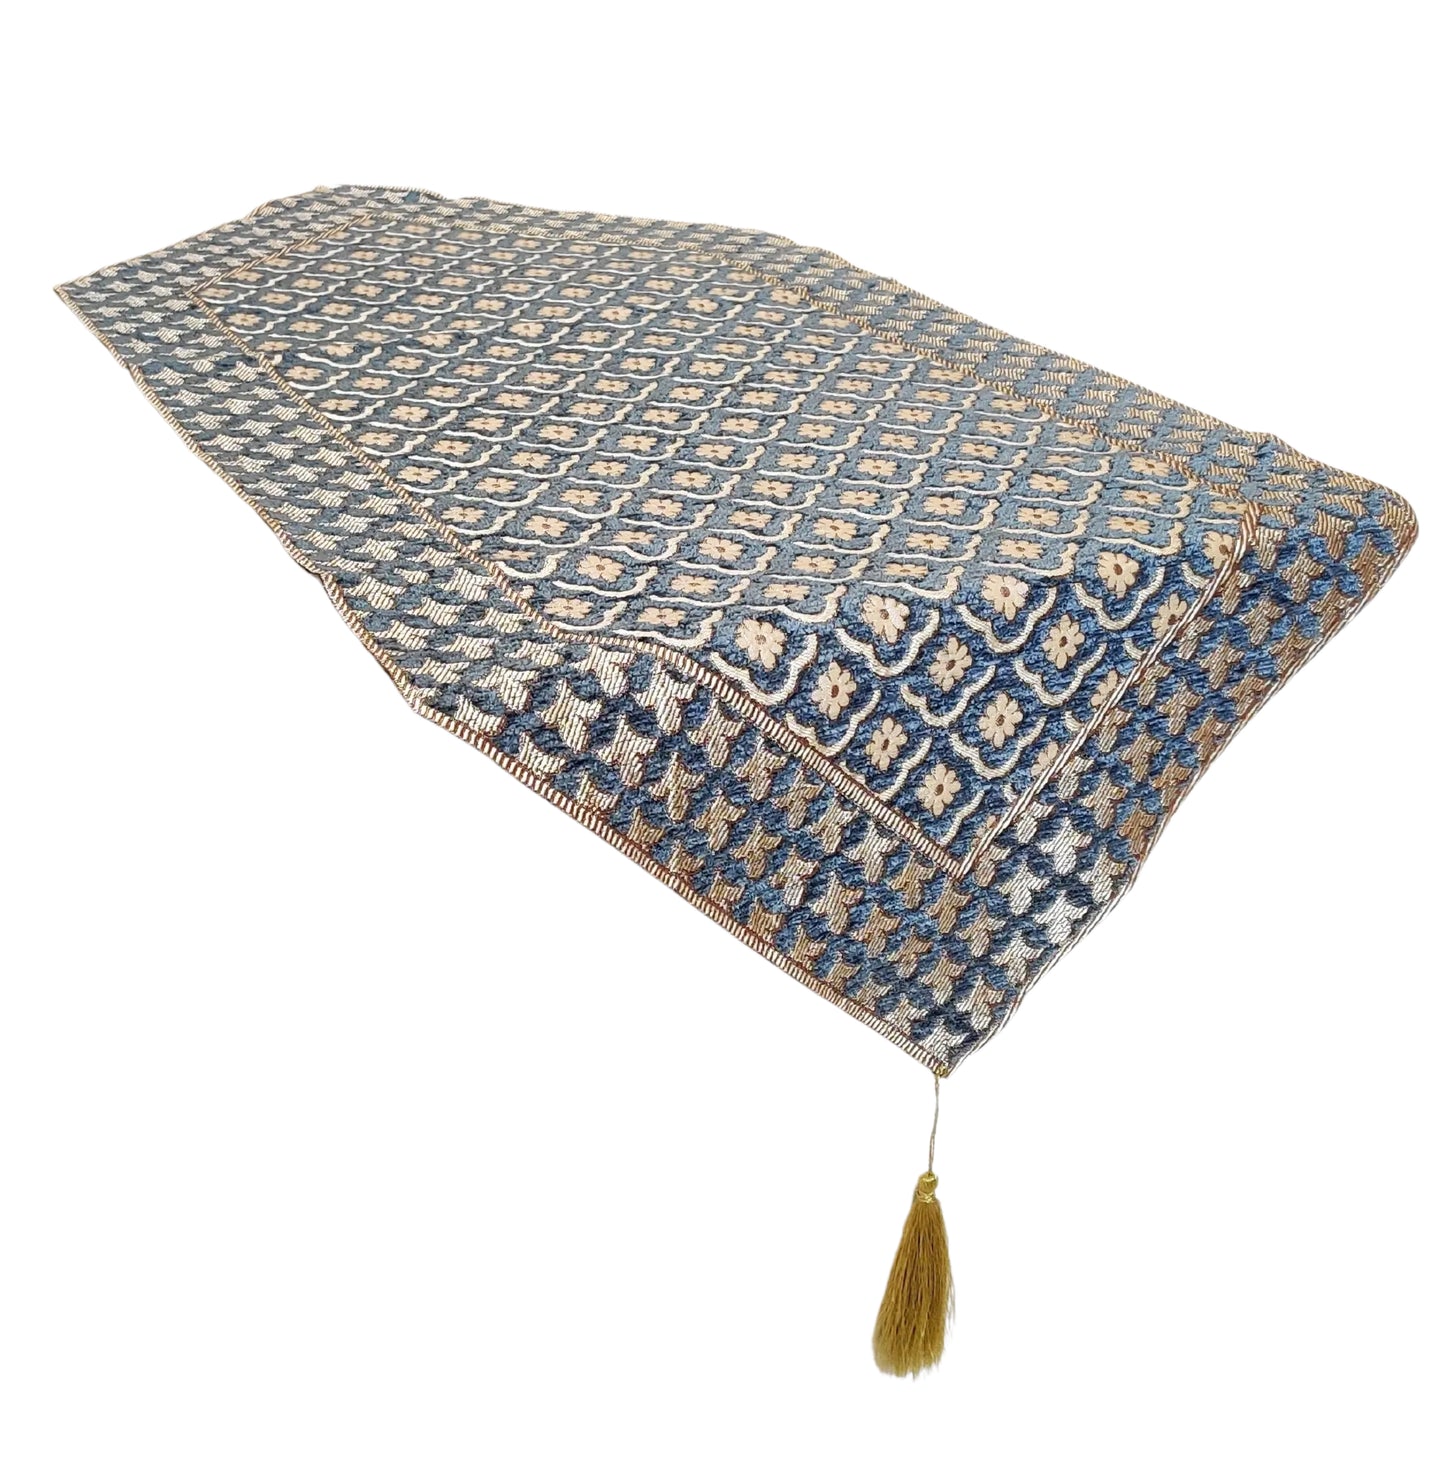 Elegant Blue Delight: Cotton Table Runner in Rich and Stunning Blue Hue, Pack of 1 piece, Blue, 36 X 16 Inches